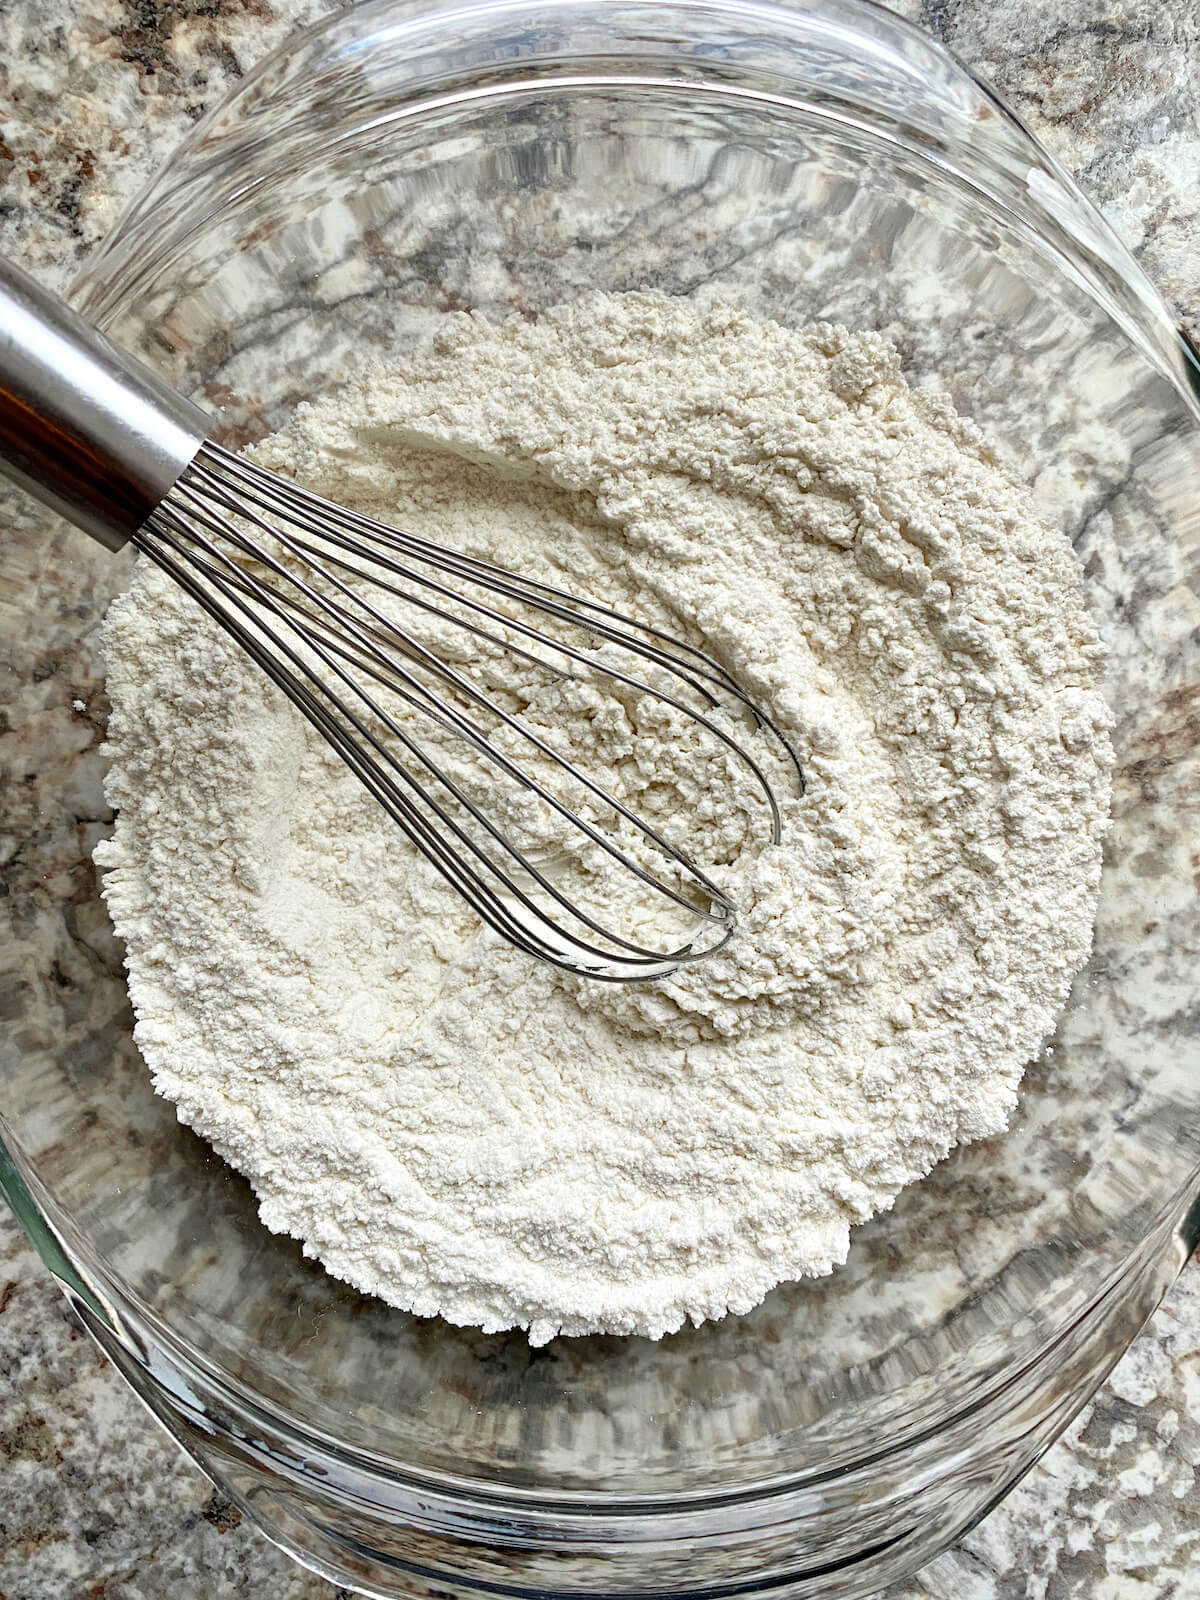 Flour, baking soda, and salt whisked together in a glass mixing bowl.